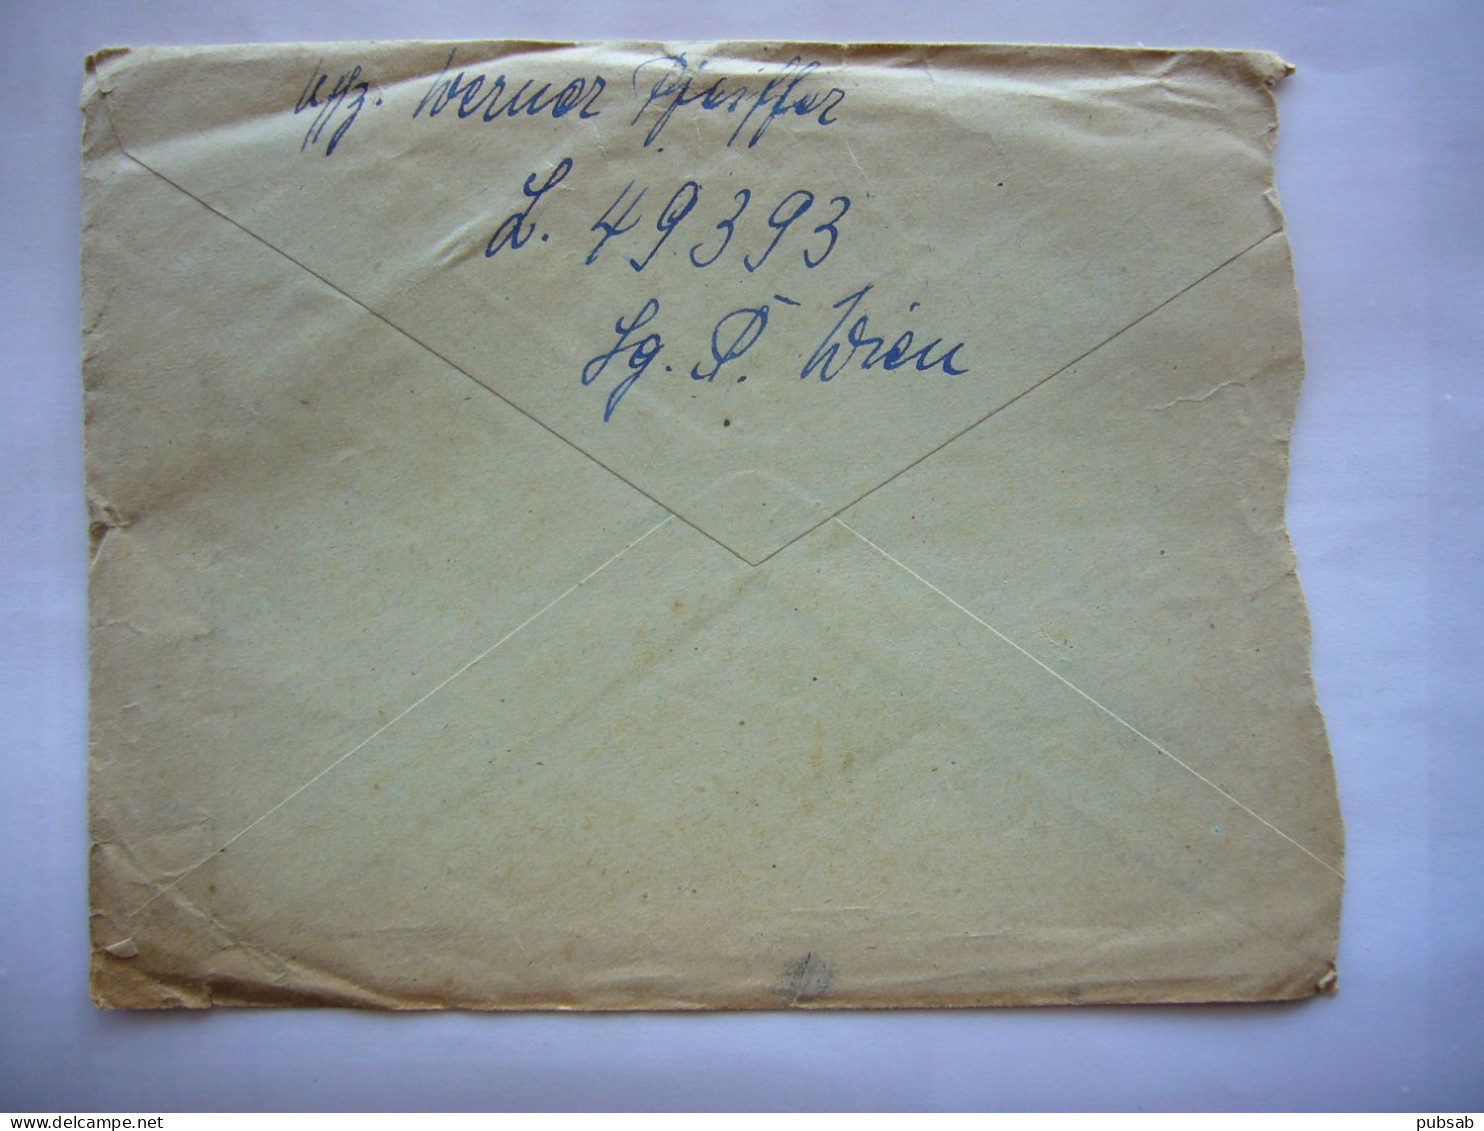 Avion / Airplane / 4th Air Mail Round Up / From Canton, Ohio To Columbus, Ohio / Apr 20,1944 At Ll,30 PM - 2c. 1941-1960 Cartas & Documentos